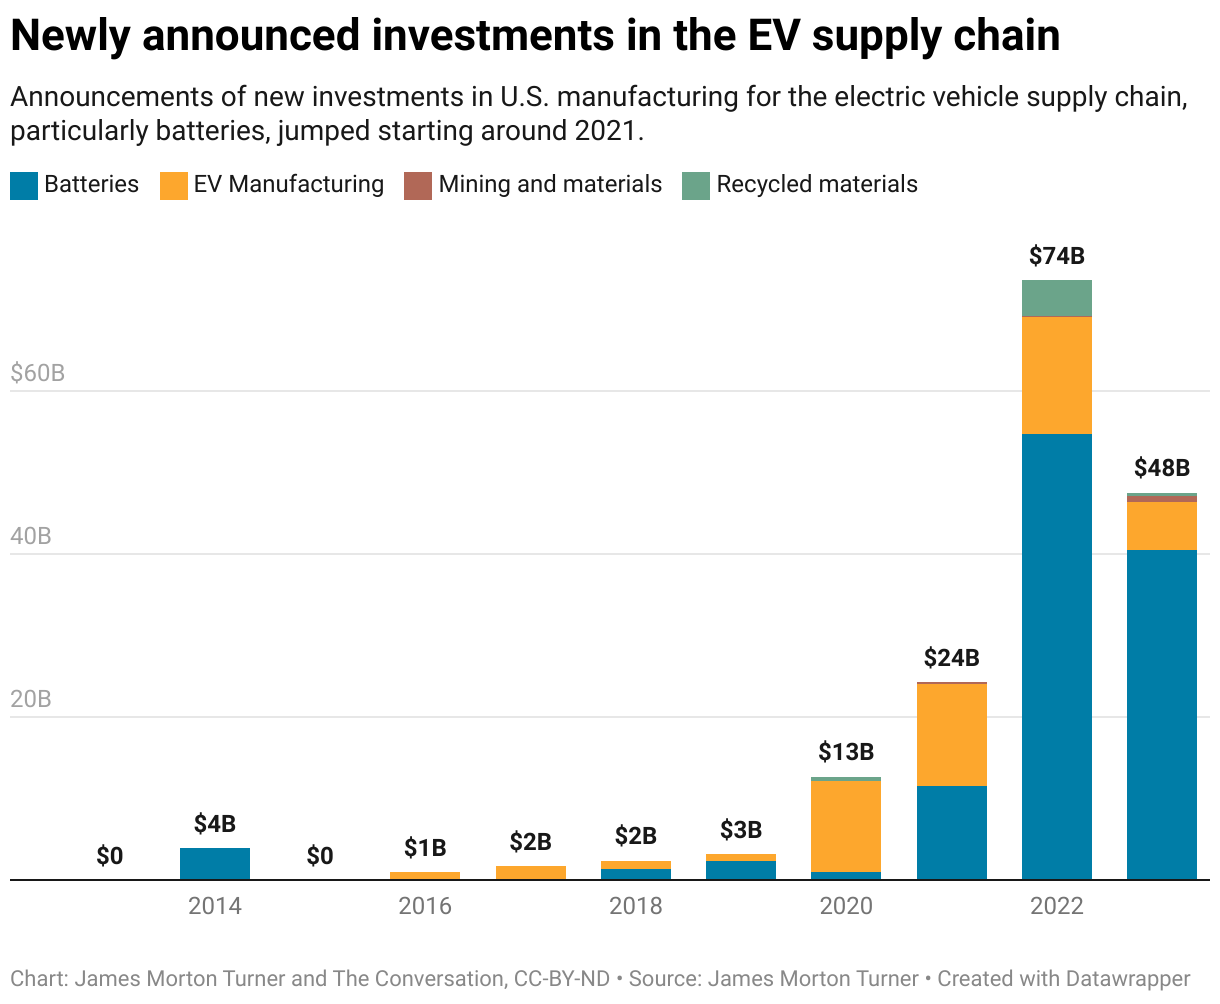 Newly announced investments in the EV supply chain